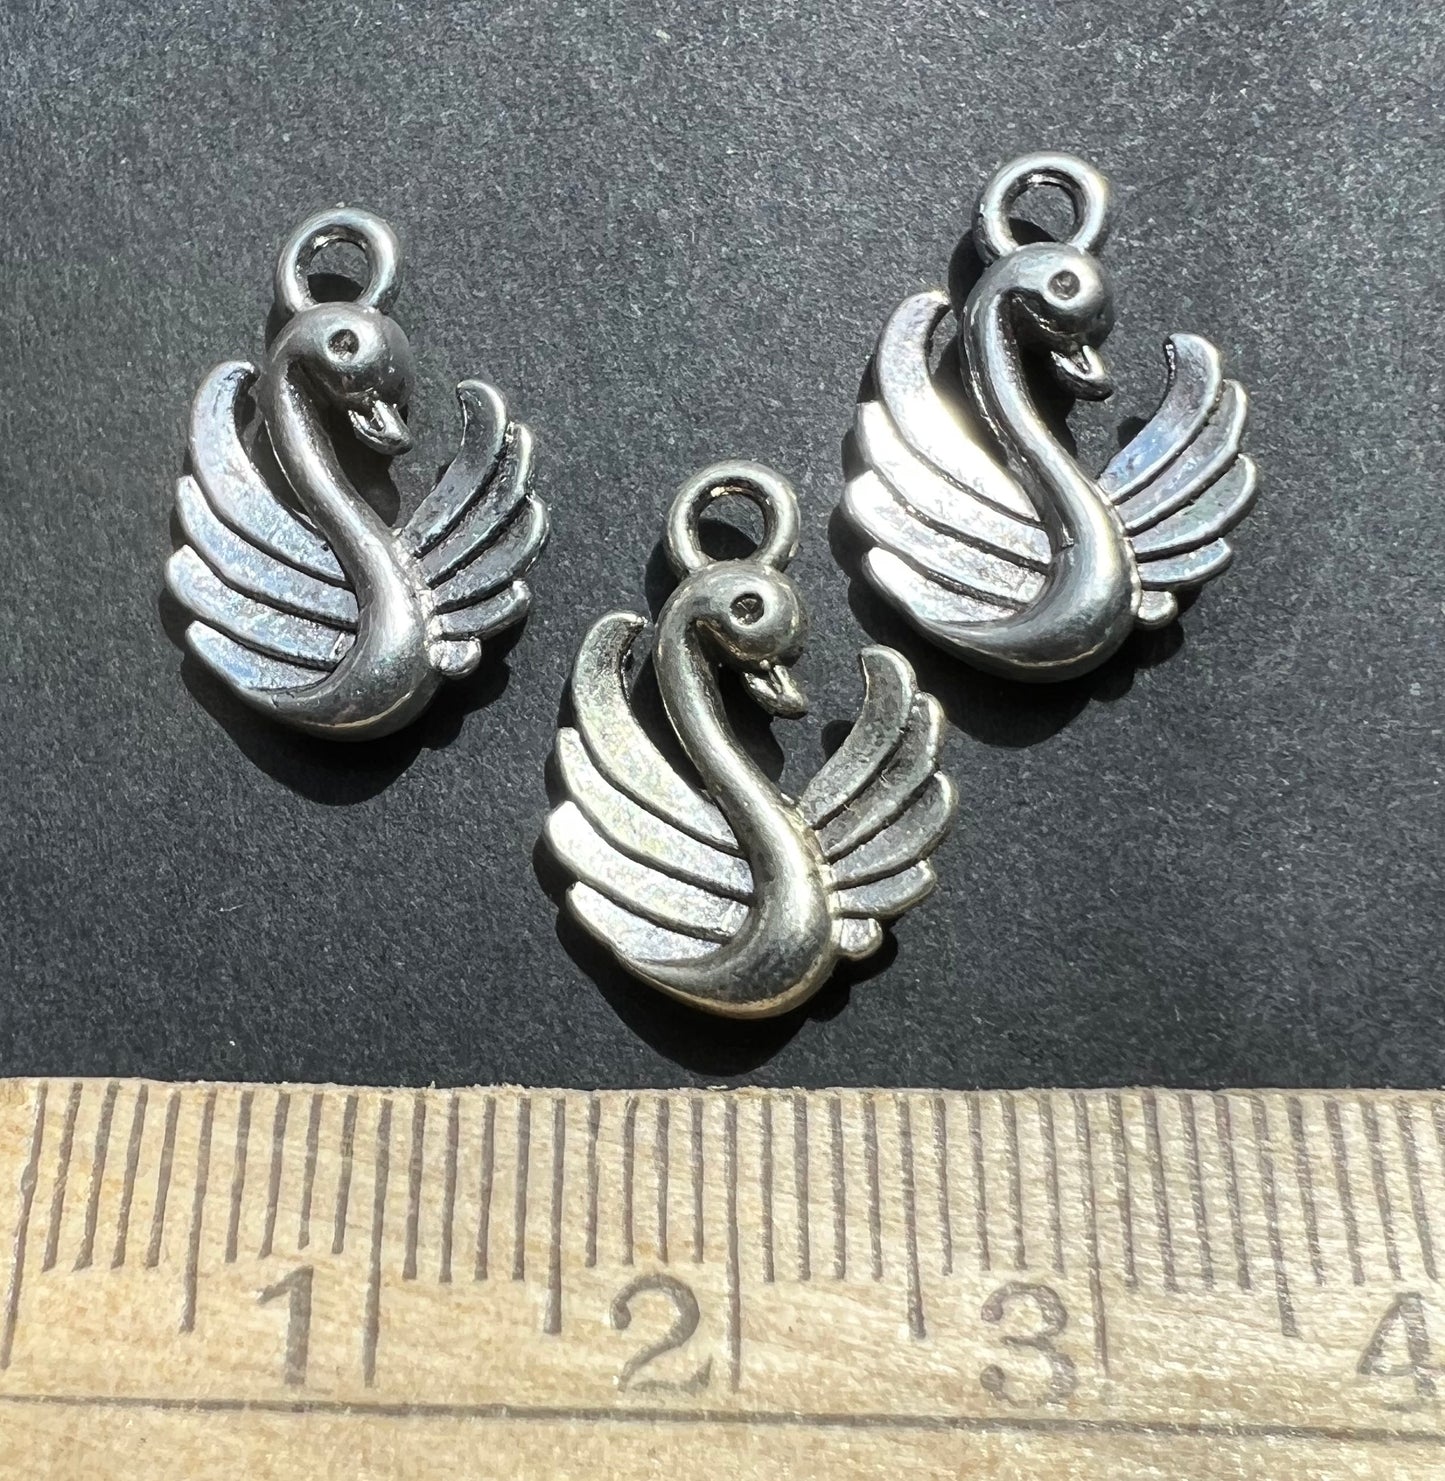 3 Confident Swan Charms - 1.5cm tall.